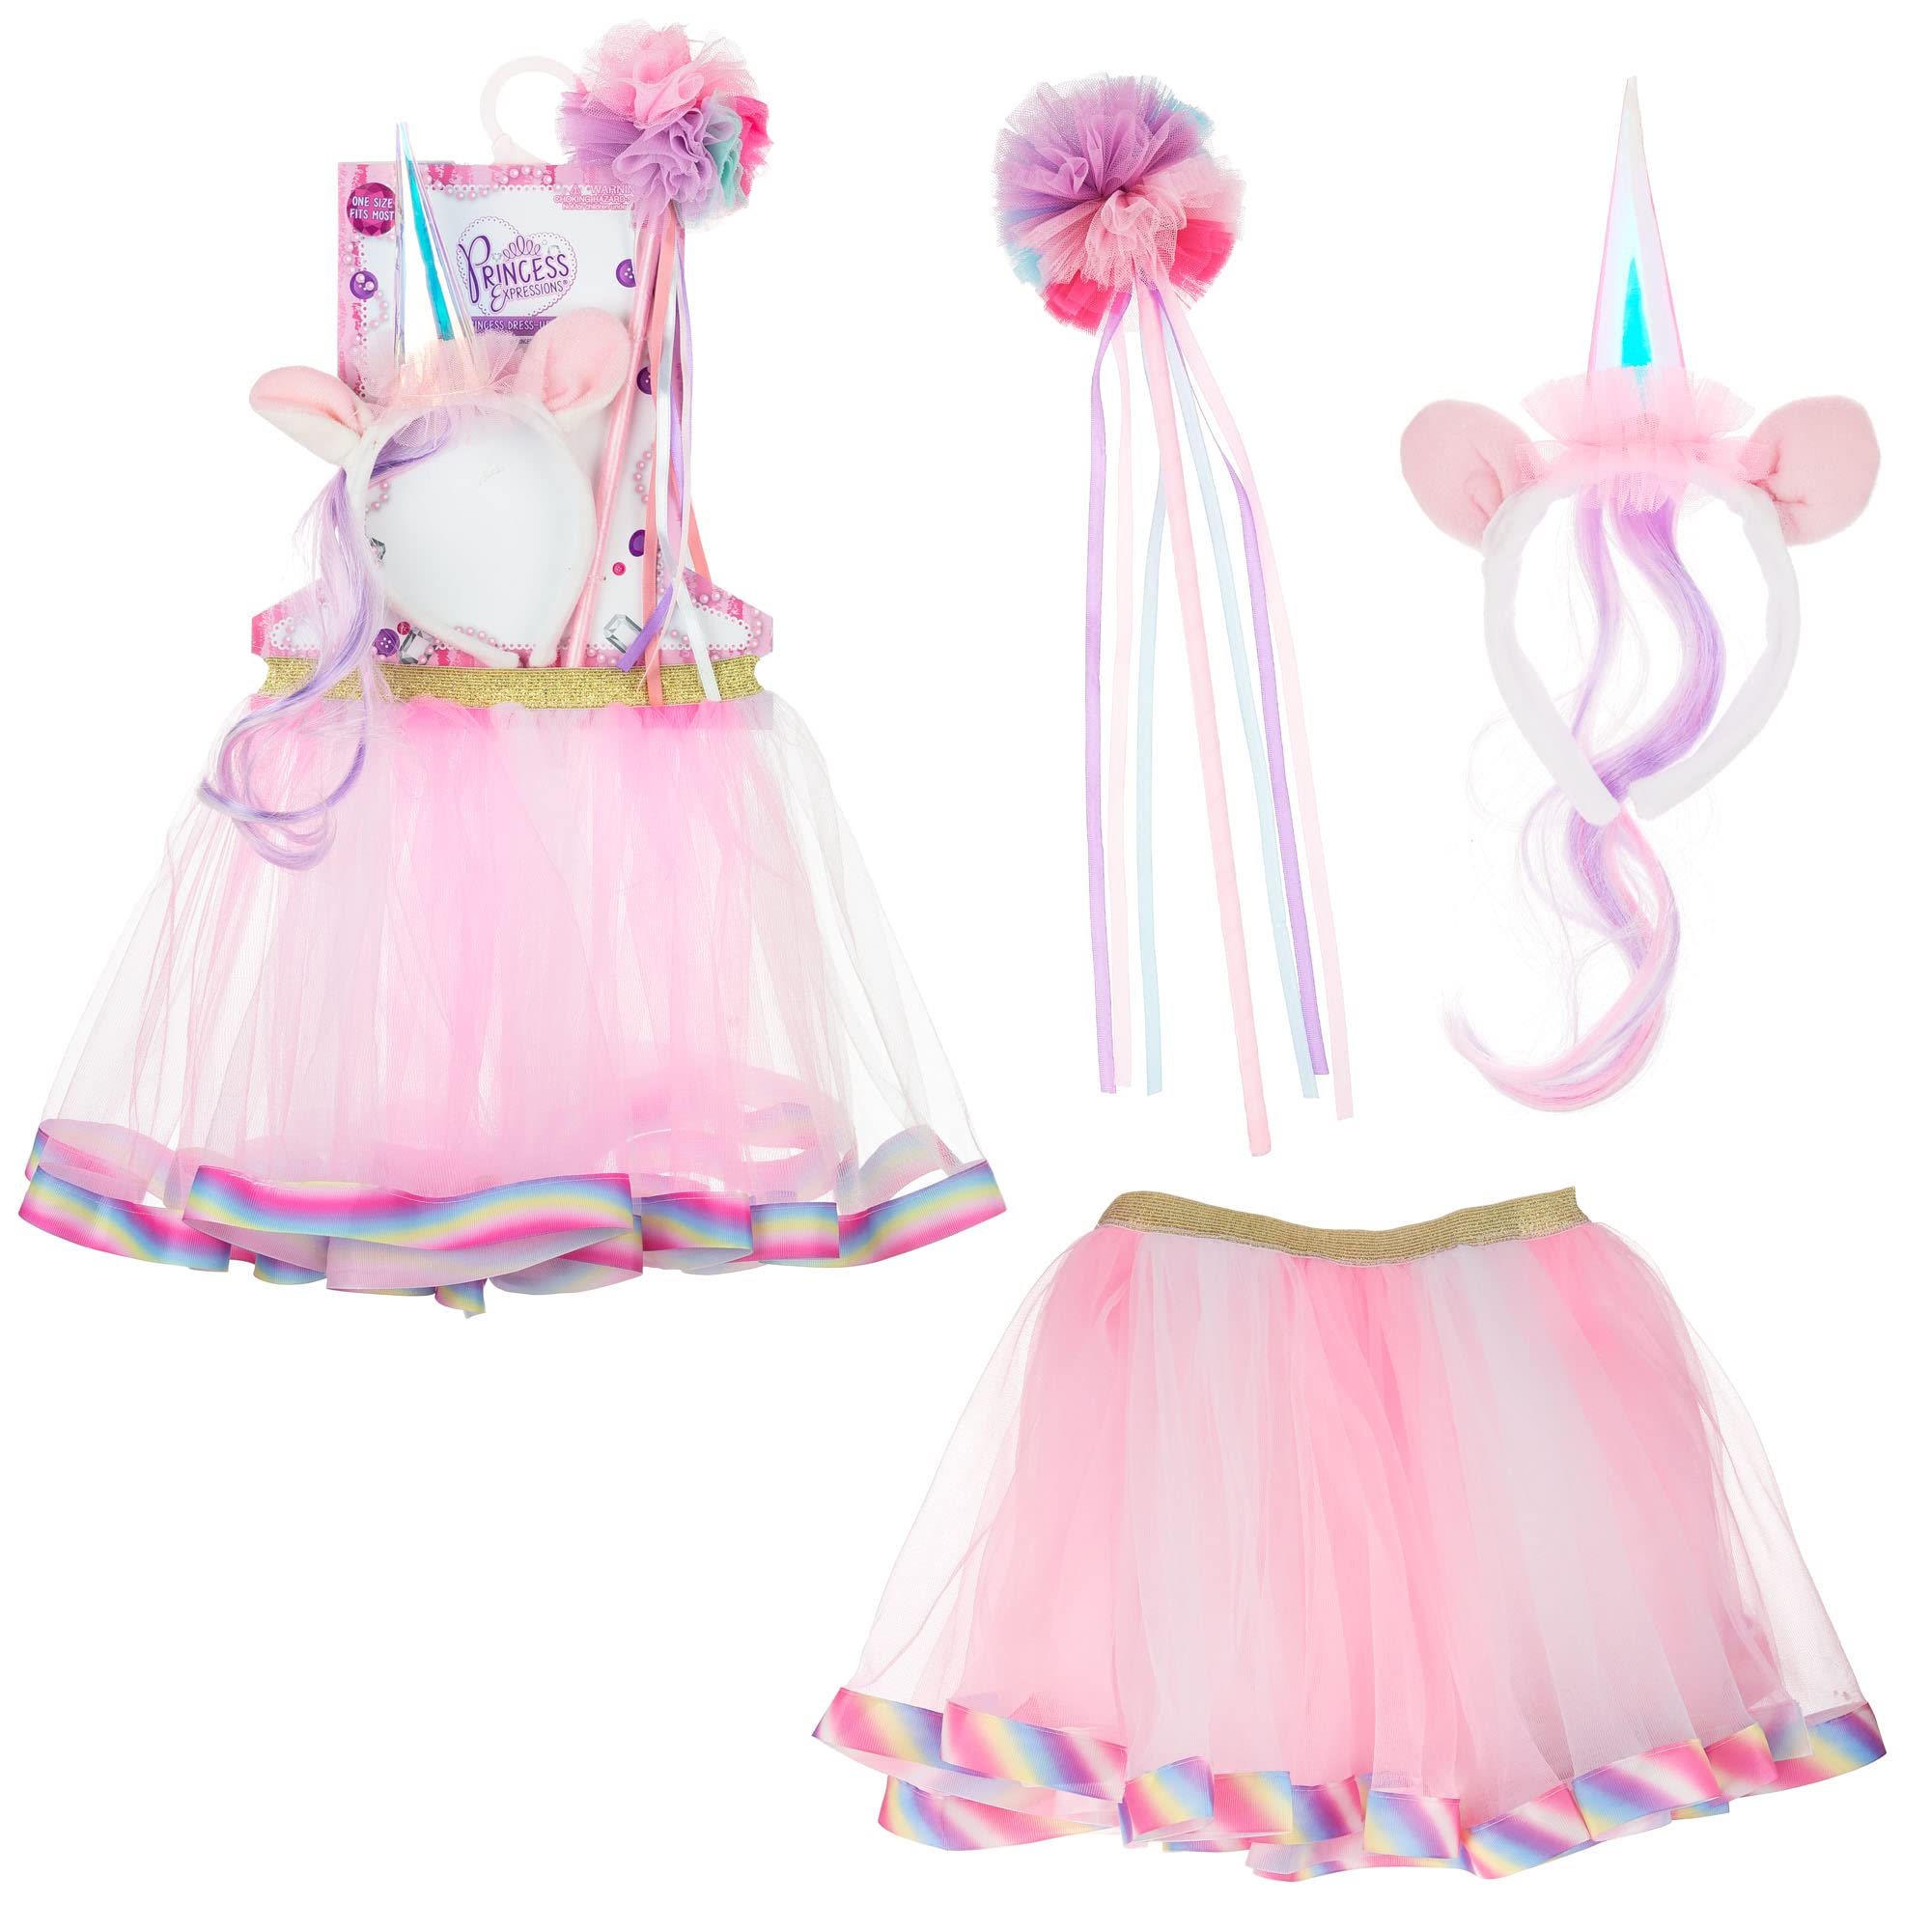 Expressions – Unicorn Princess Dress Up Set – 3 PC Play Costume ,Party Role Play Dress up, Party ,Perfect for kids princess birthday gift,Disney cruise ,